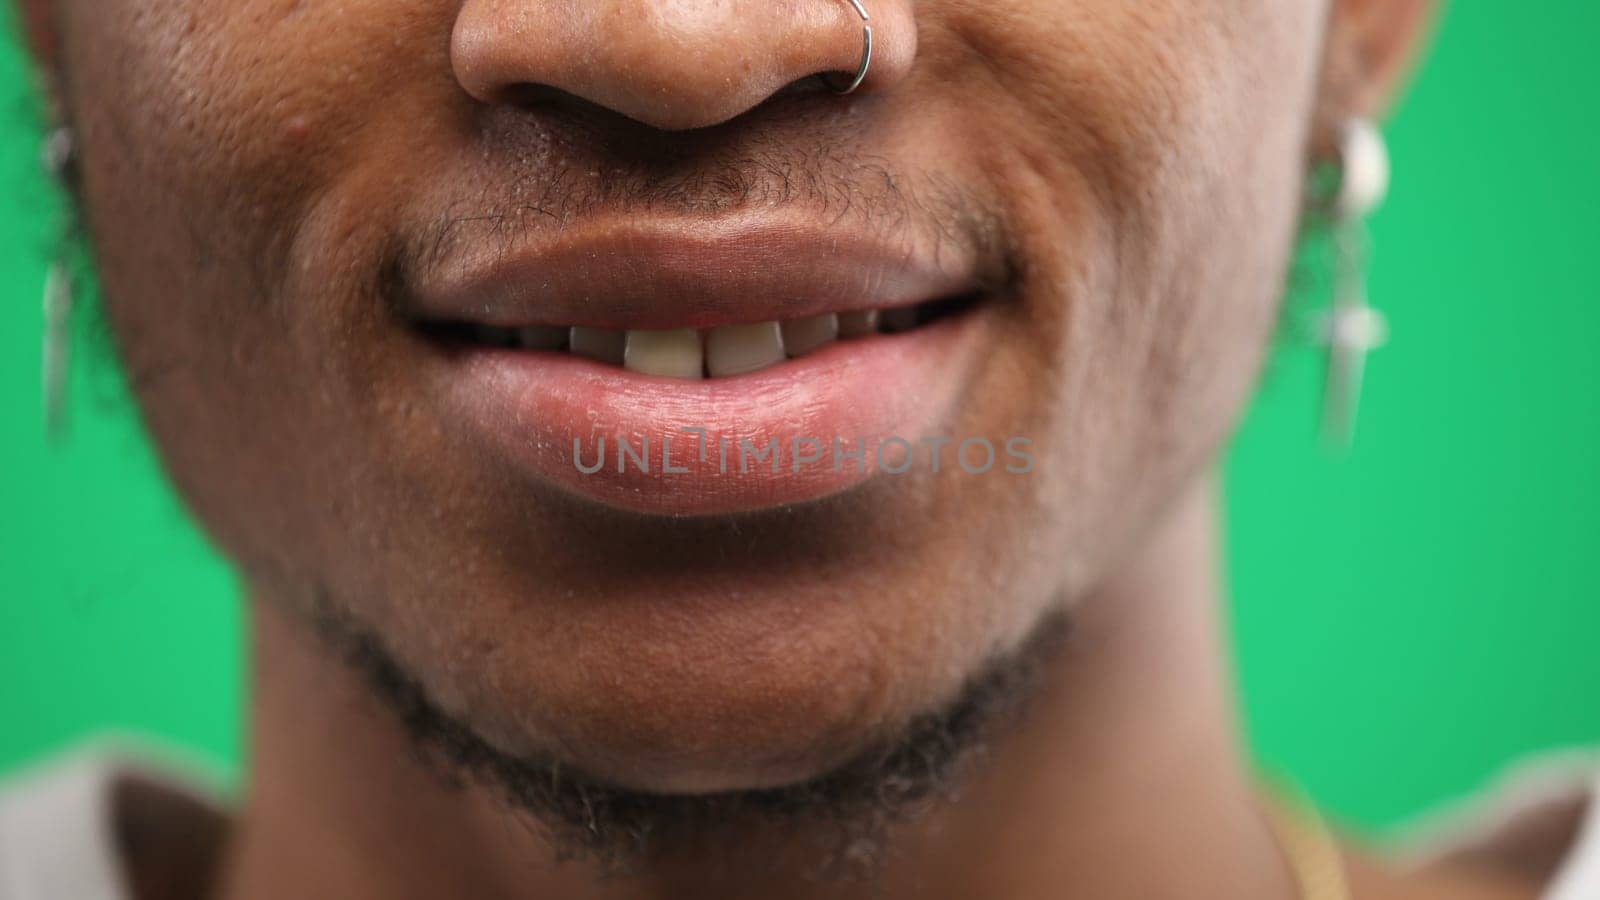 Man's mouth, close-up, on a green background by Prosto